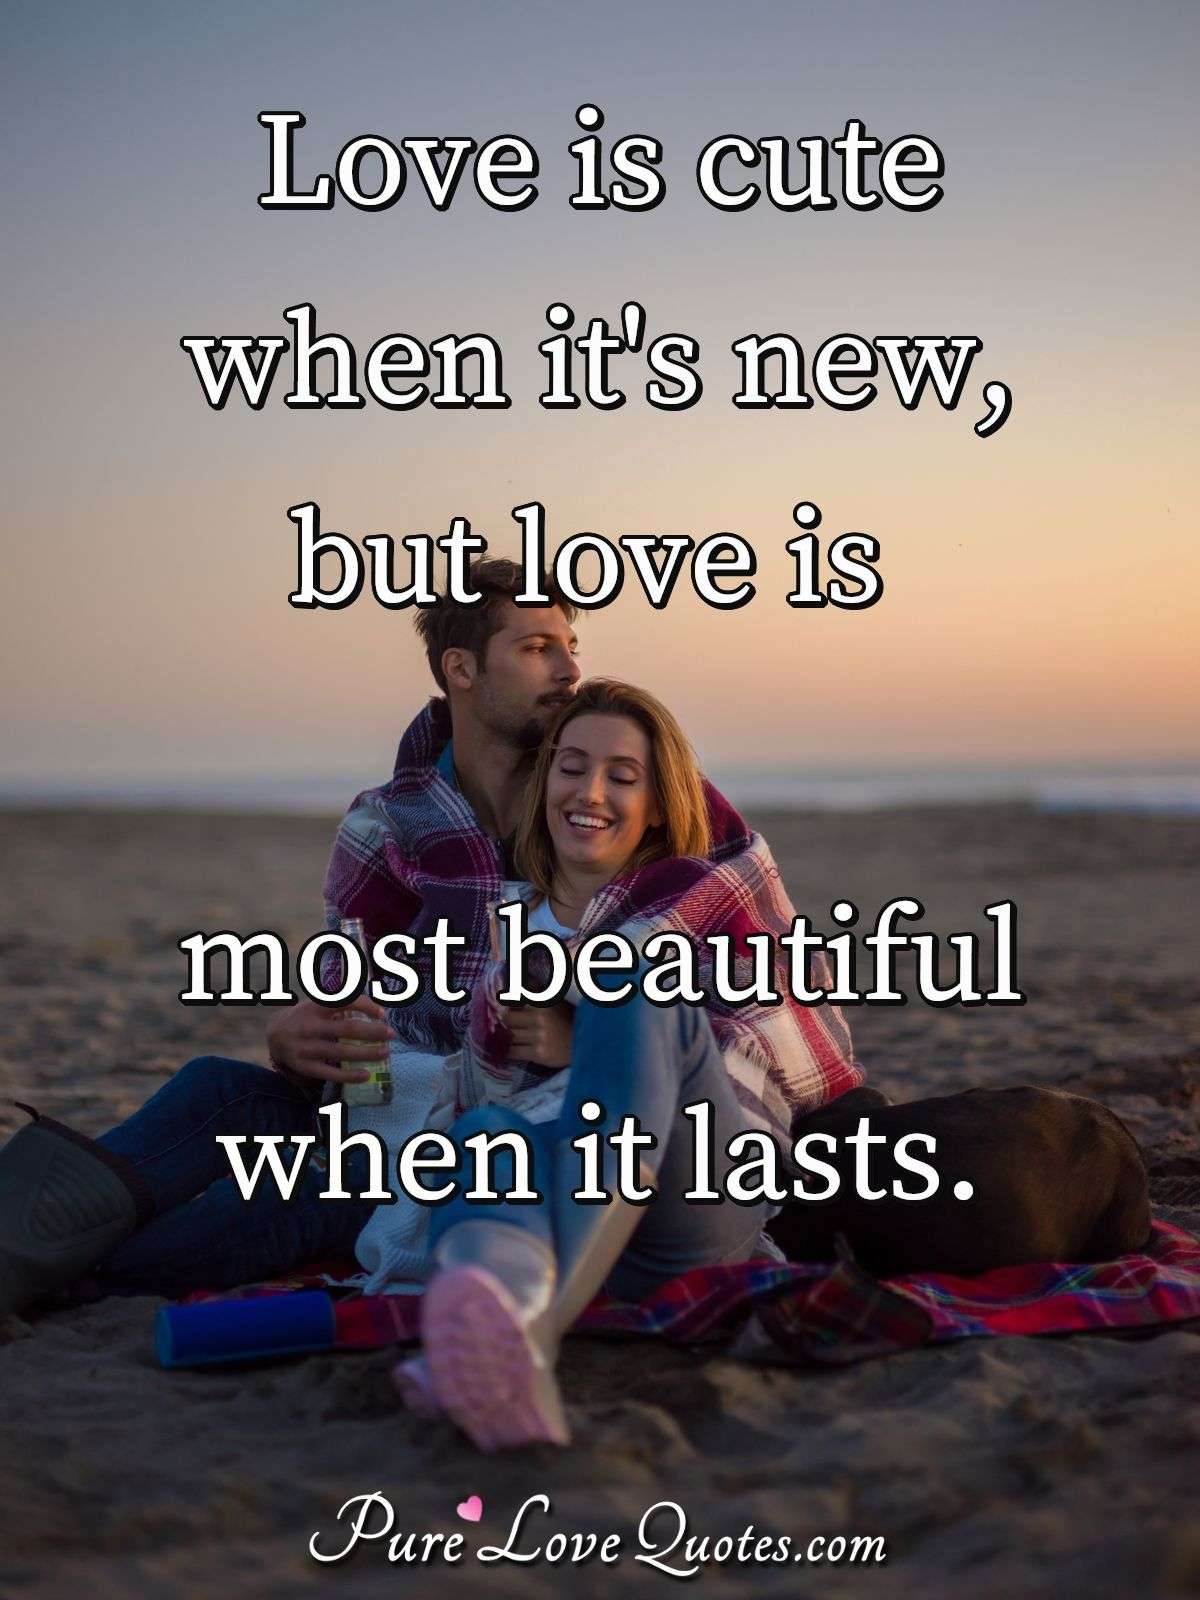 Love is cute when it's new, but love is most beautiful when it lasts. - Anonymous